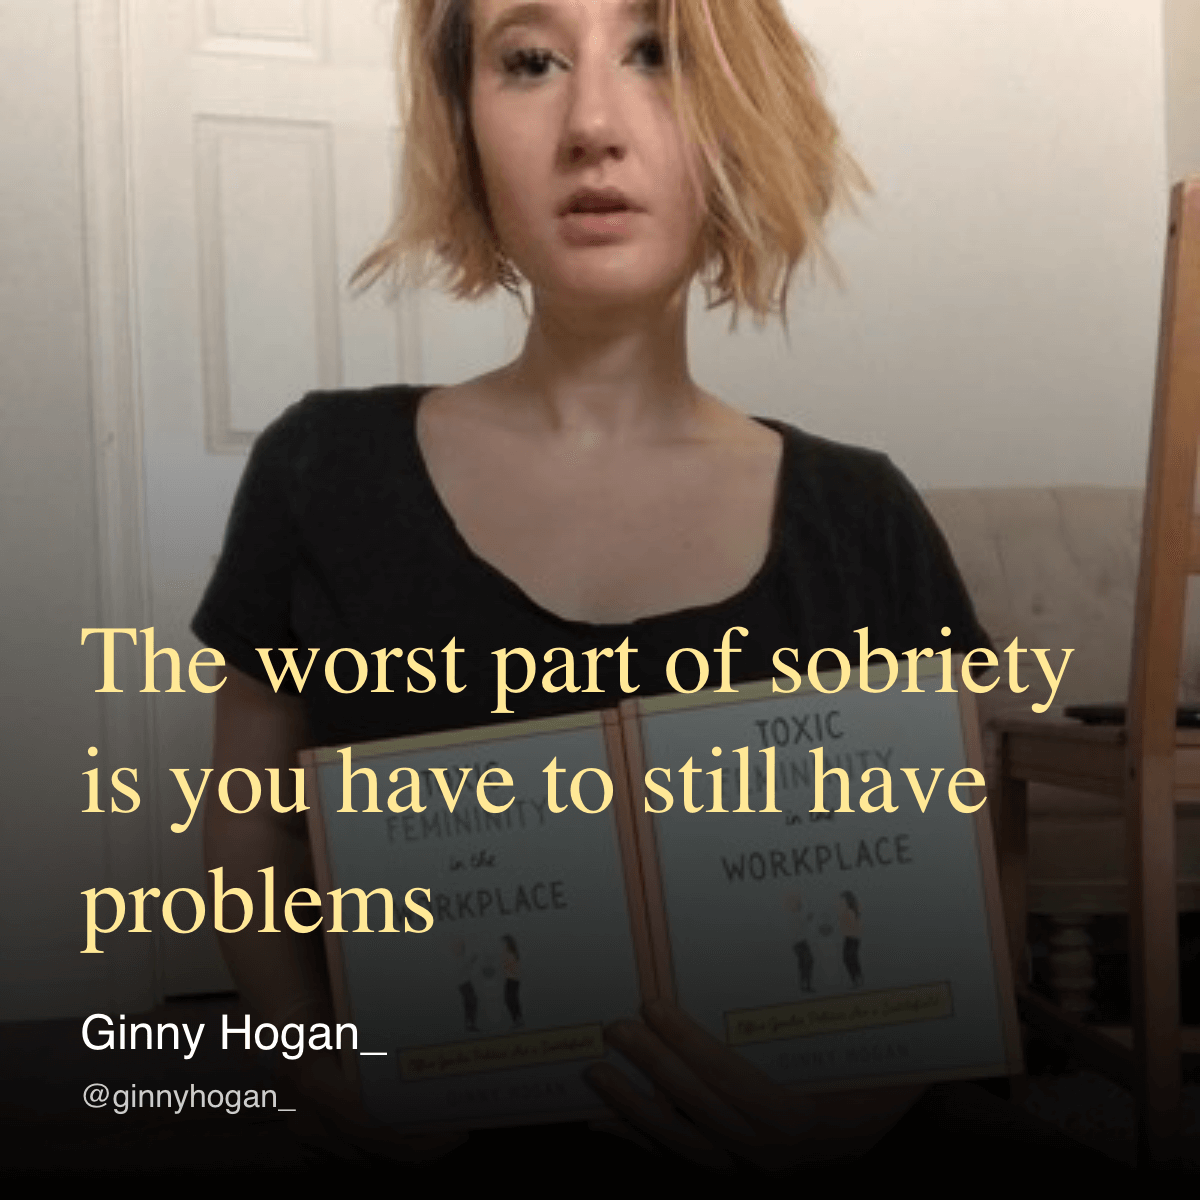 The worst part of sobriety is you have to still have problems